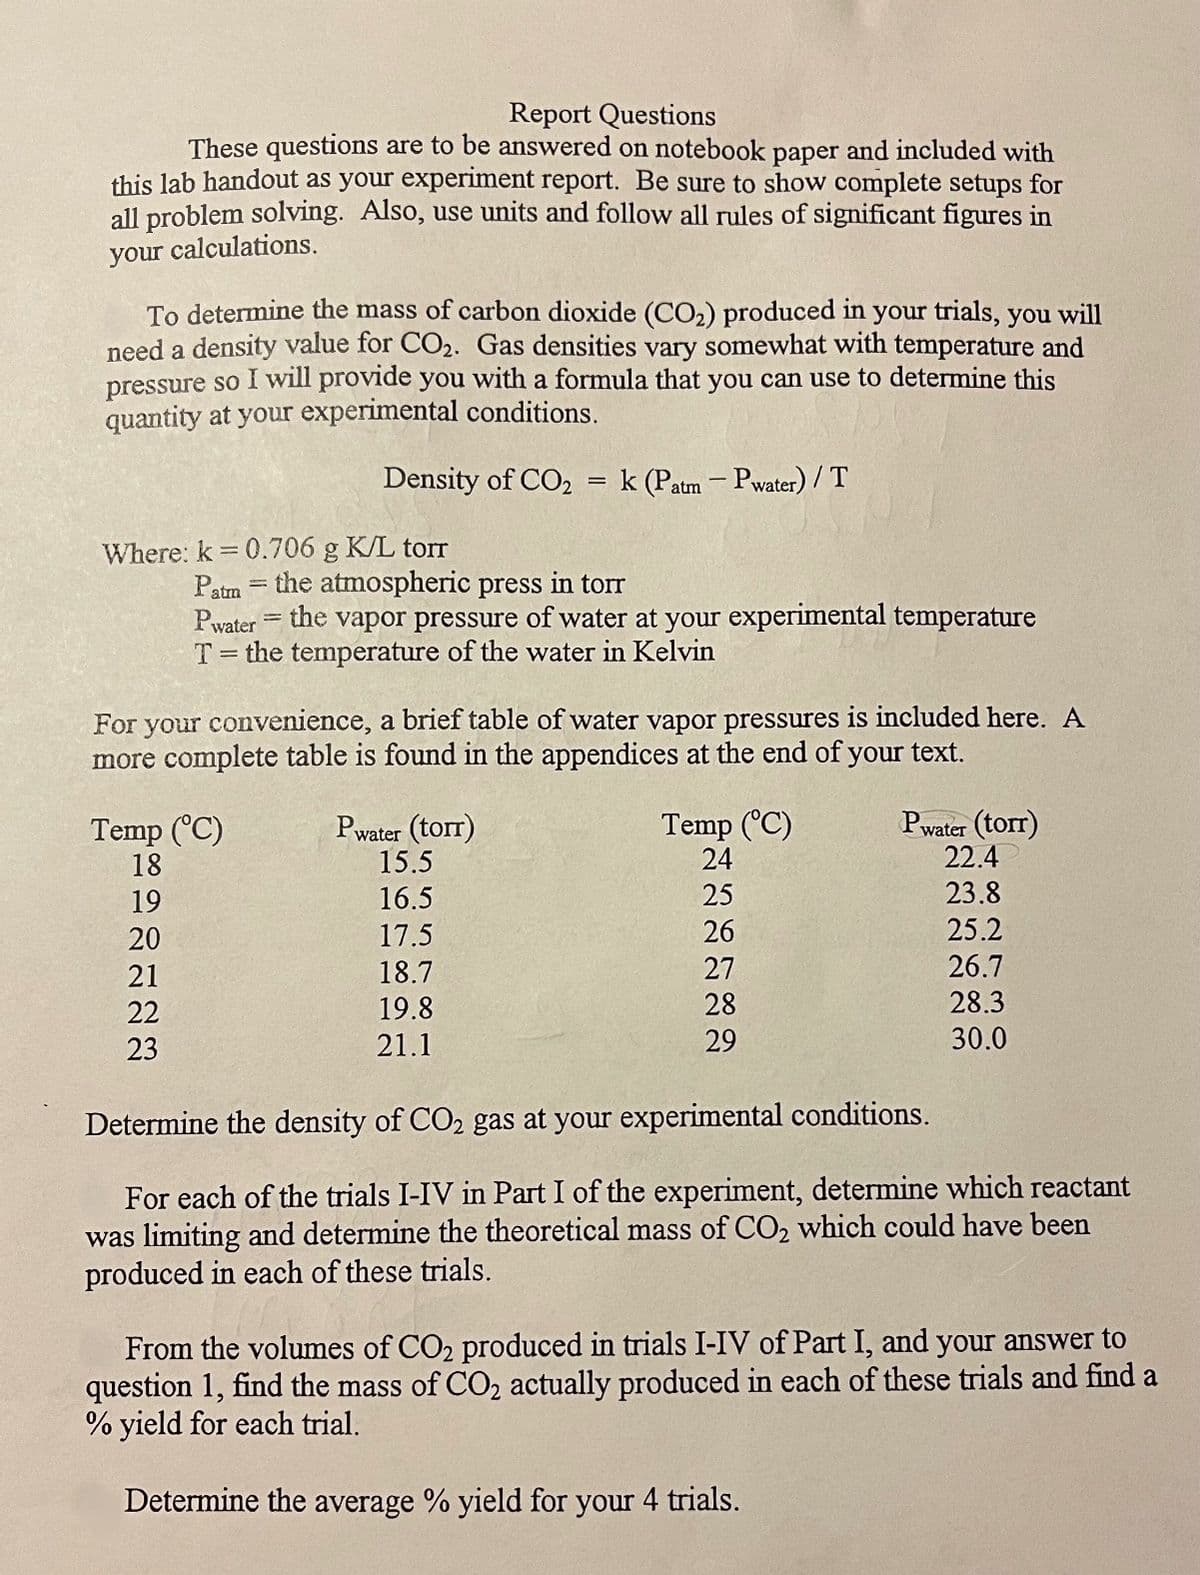 Report Questions
These questions are to be answered on notebook paper and included with
this lab handout as your experiment report. Be sure to show complete setups for
all problem solving. Also, use units and follow all rules of significant figures in
your calculations.
To determine the mass of carbon dioxide (CO2) produced in your trials, you will
need a density value for CO2. Gas densities vary somewhat with temperature and
pressure so I will provide you with a formula that you can use to determine this
quantity at your experimental conditions.
Density of CO2 = k (Patm- Pwater) / T
Where: k 0.706 g K/L torr
Patm
Pwater
%3D
the atmospheric press in torr
the vapor pressure of water at your experimental temperature
%3D
T= the temperature of the water in Kelvin
For your convenience, a brief table of water vapor pressures is included here. A
more complete table is found in the appendices at the end of your text.
Temp (°C)
18
Pwater (torr)
15.5
Temp (°C)
24
Pwater (torr)
22.4
19
16.5
25
23.8
20
17.5
26
25.2
21
18.7
27
26.7
22
19.8
28
28.3
23
21.1
29
30.0
Determine the density of CO2 gas at your experimental conditions.
For each of the trials I-IV in Part I of the experiment, determine which reactant
was limiting and determine the theoretical mass of CO2 which could have been
produced in each of these trials.
From the volumes of CO2 produced in trials I-IV of Part I, and your answer to
question 1, find the mass of CO2 actually produced in each of these trials and find a
% yield for each trial.
Determine the average % yield for your 4 trials.
